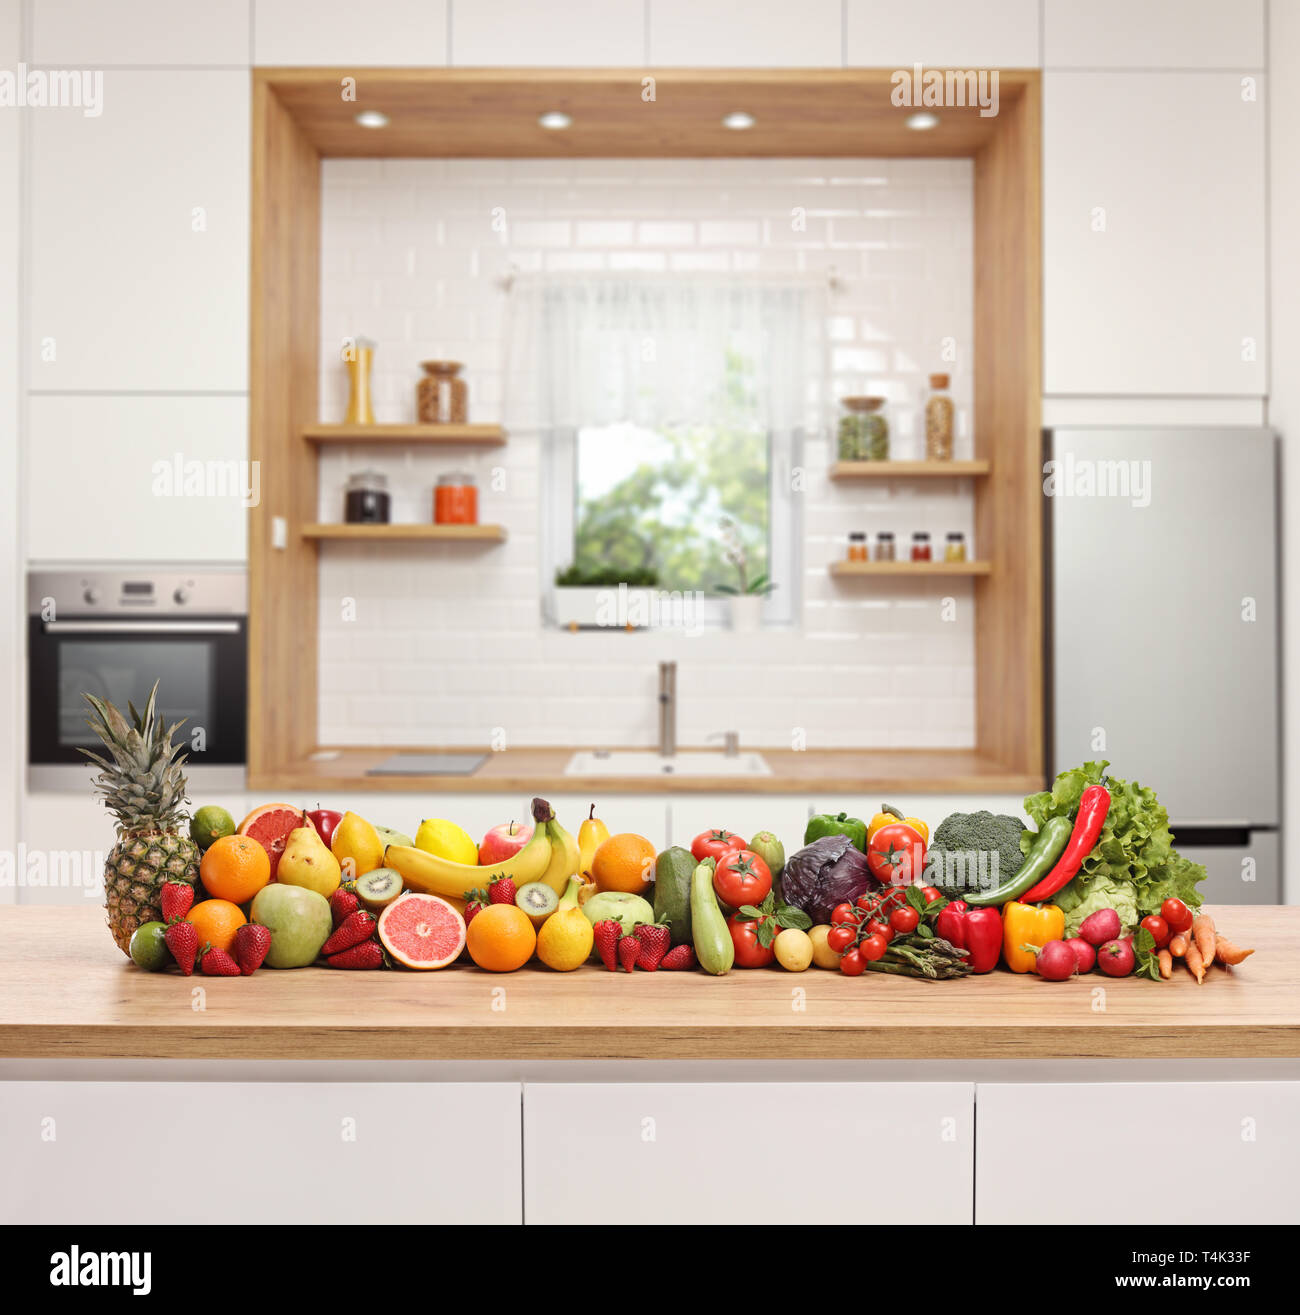 Fruits And Vegetables Placed On A Wooden Counter In A Modern